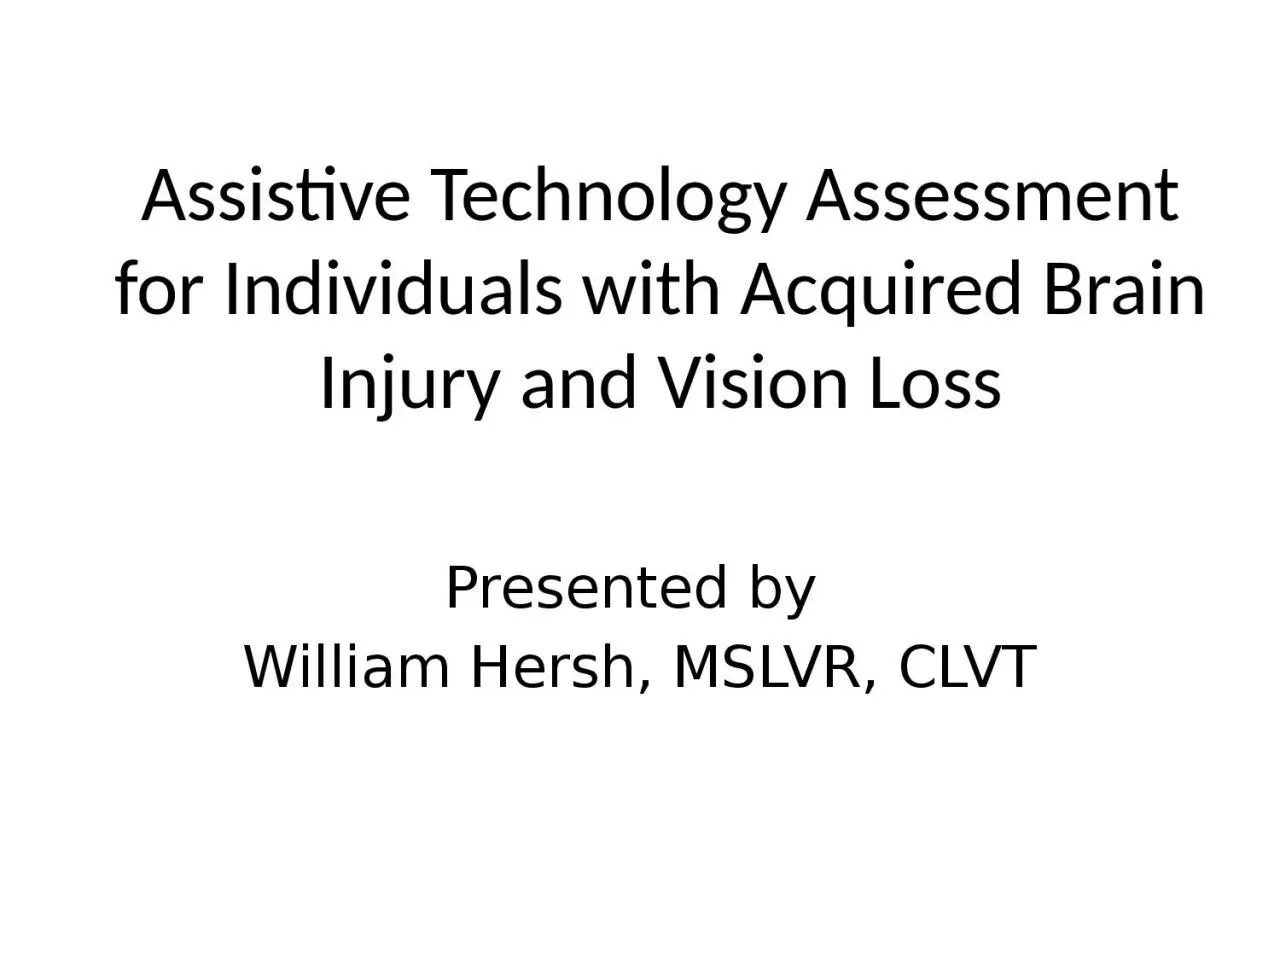 Assistive Technology Assessment for Individuals with Acquired Brain Injury and Vision